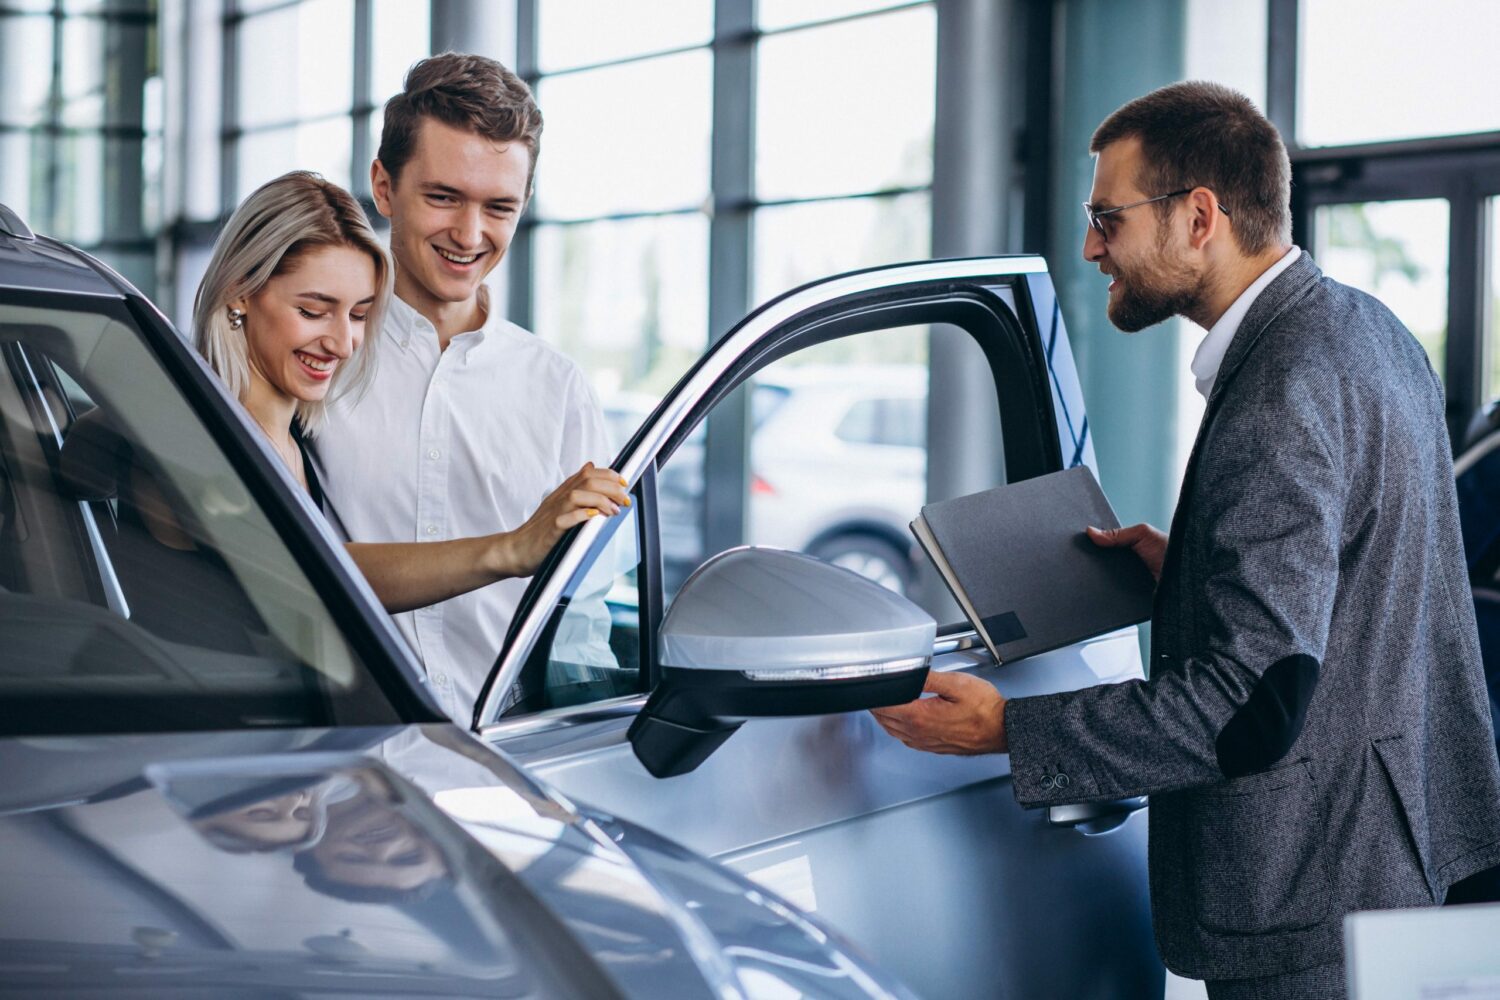 With some forethought and customer insight, ethical upselling can be used to reinforce trust and confidence in the dealership.